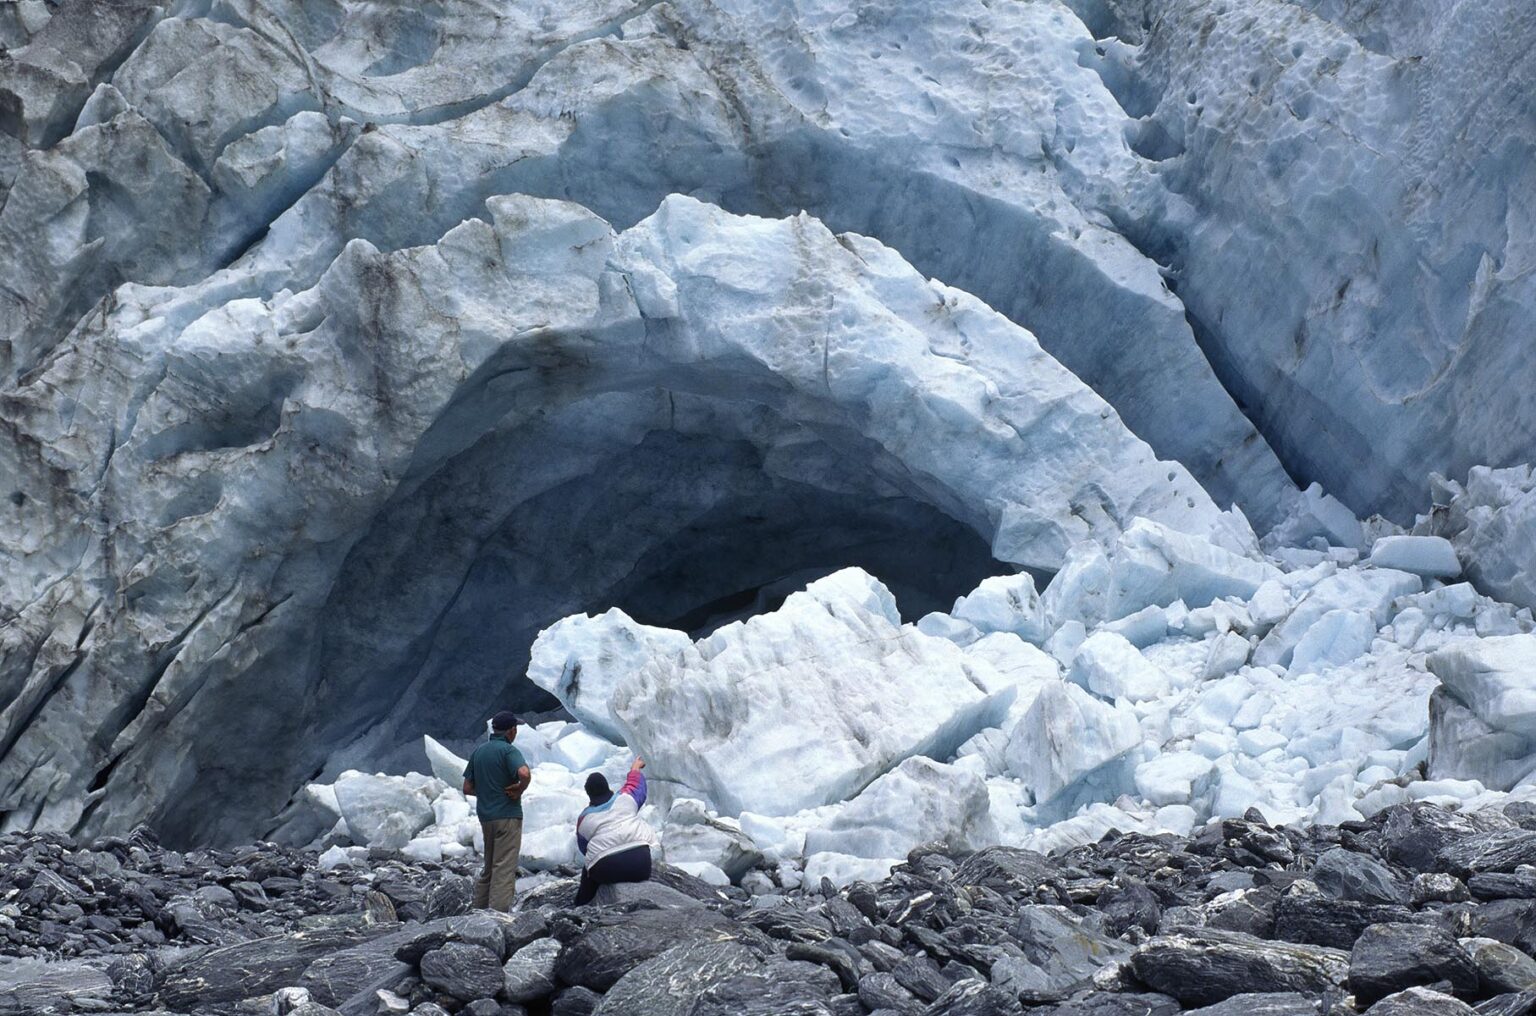 Visitors explore the mouth of the FRANZ JOSEF glacier - SOUTH ISLAND, NEW ZEALAND